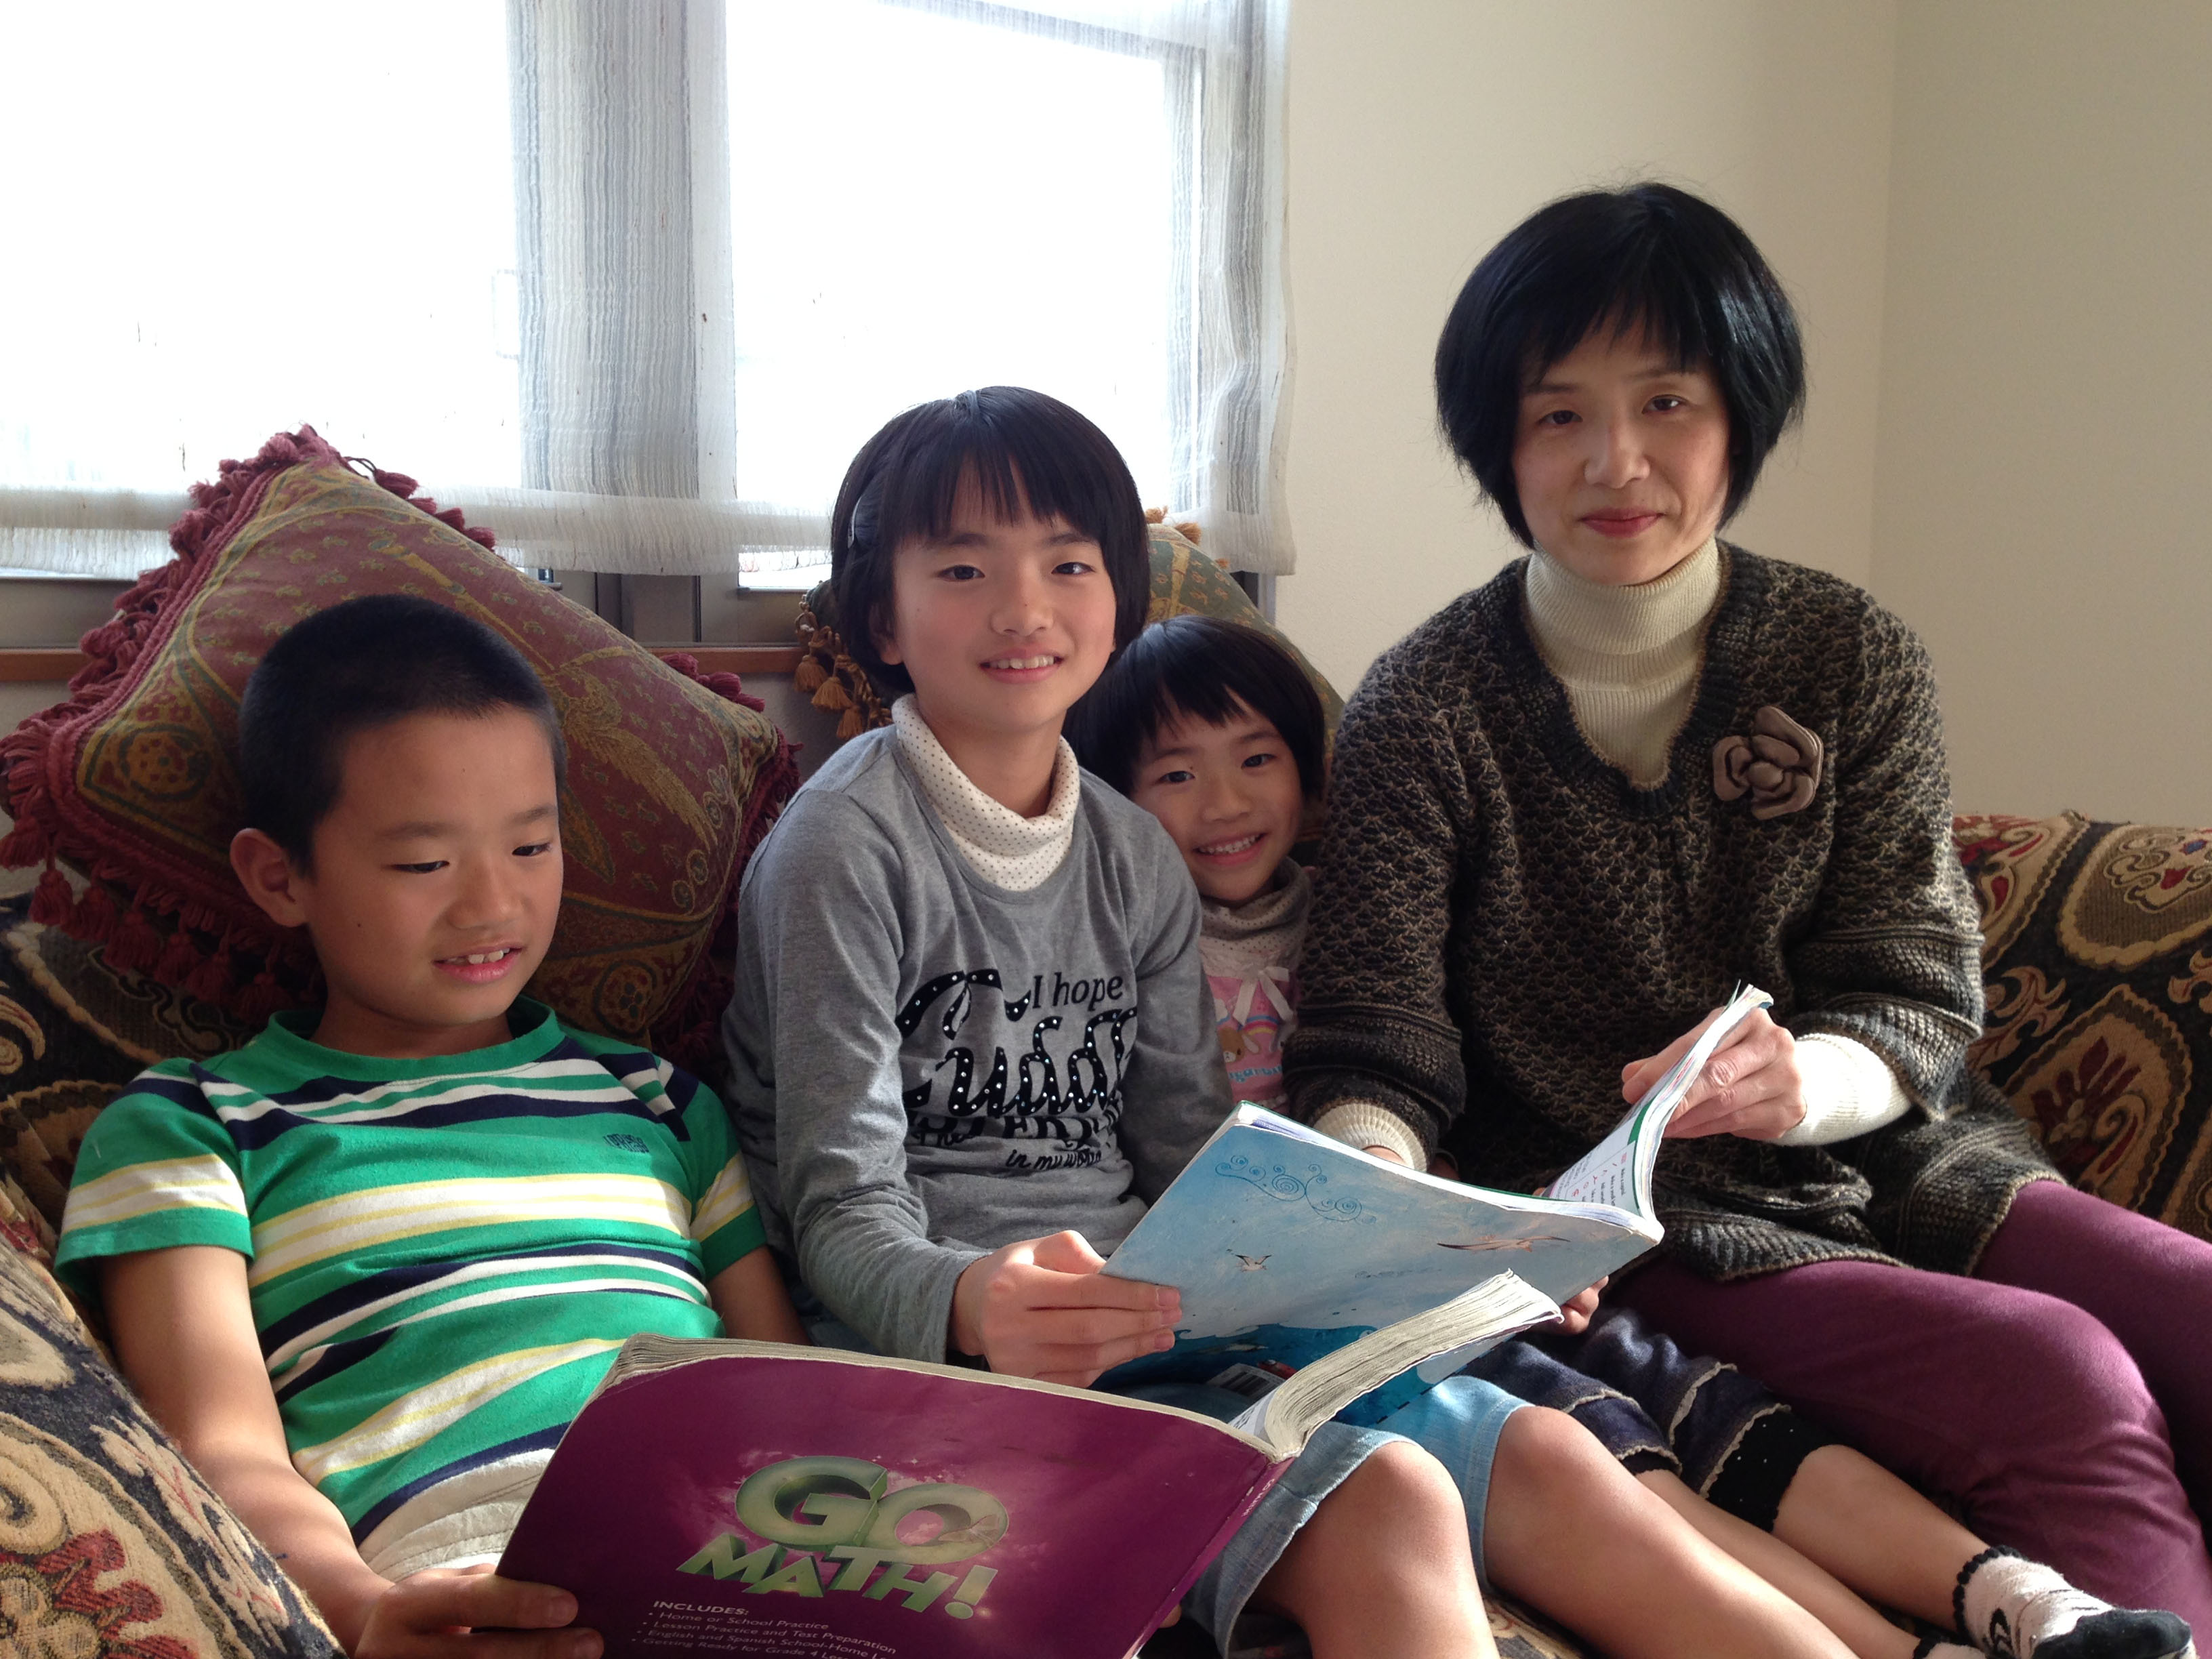 All in the family: Taichi (left), Mayu and Fuyu Sasada sit in their living room in December with their mother, Maho. | MAMI MARUKO